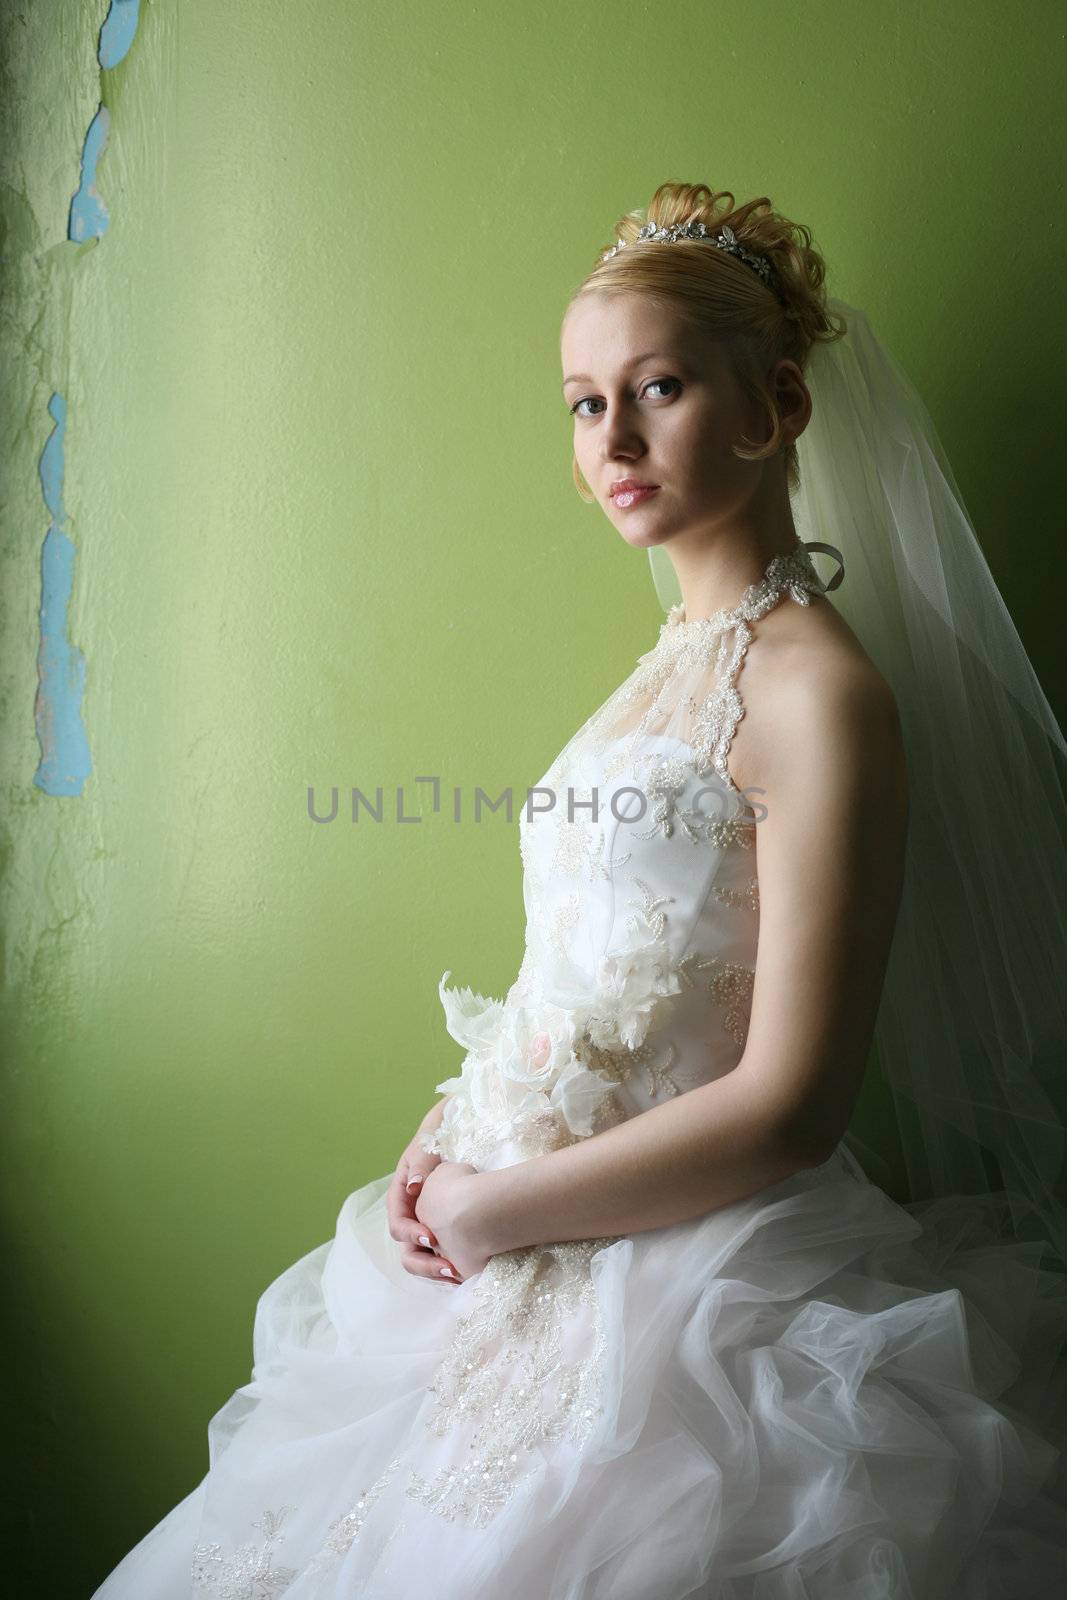 Beautiful bride in dress with flowers